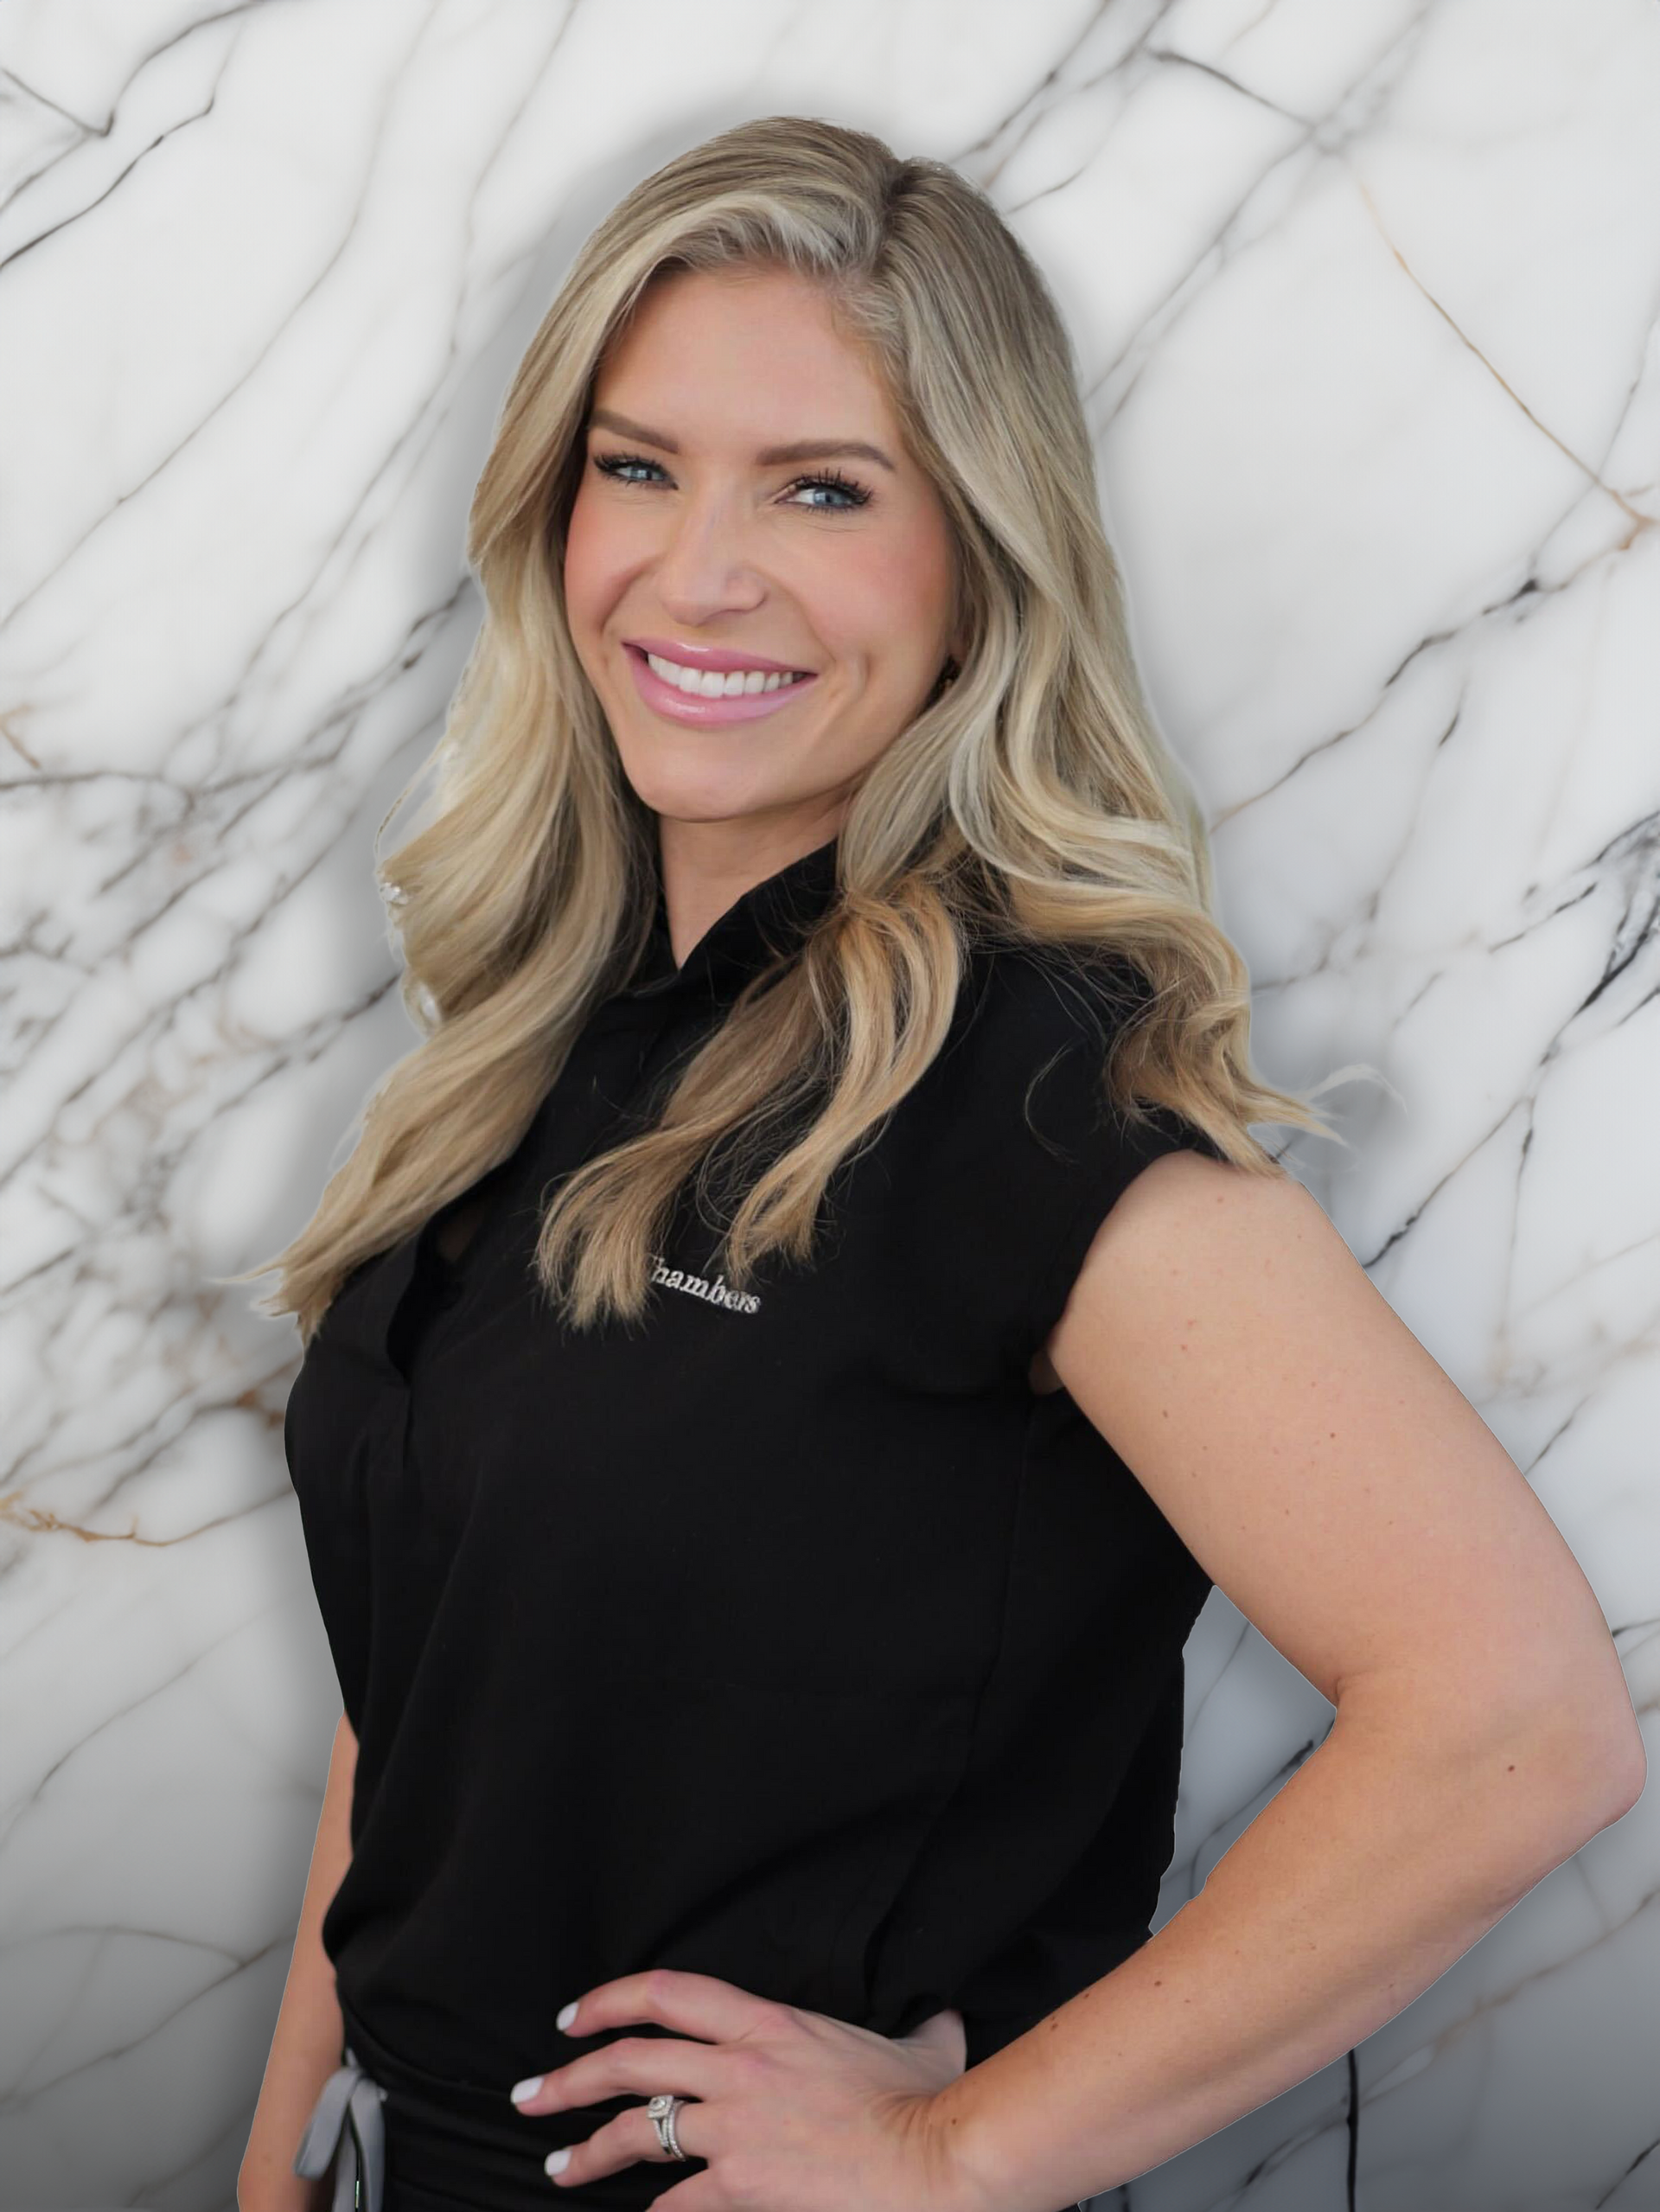 NP Ashleigh Chambers, a Princess Injector at Windermere Medical Spa in Orlando, with 10 years of expertise in dermatology and holistic skin care.